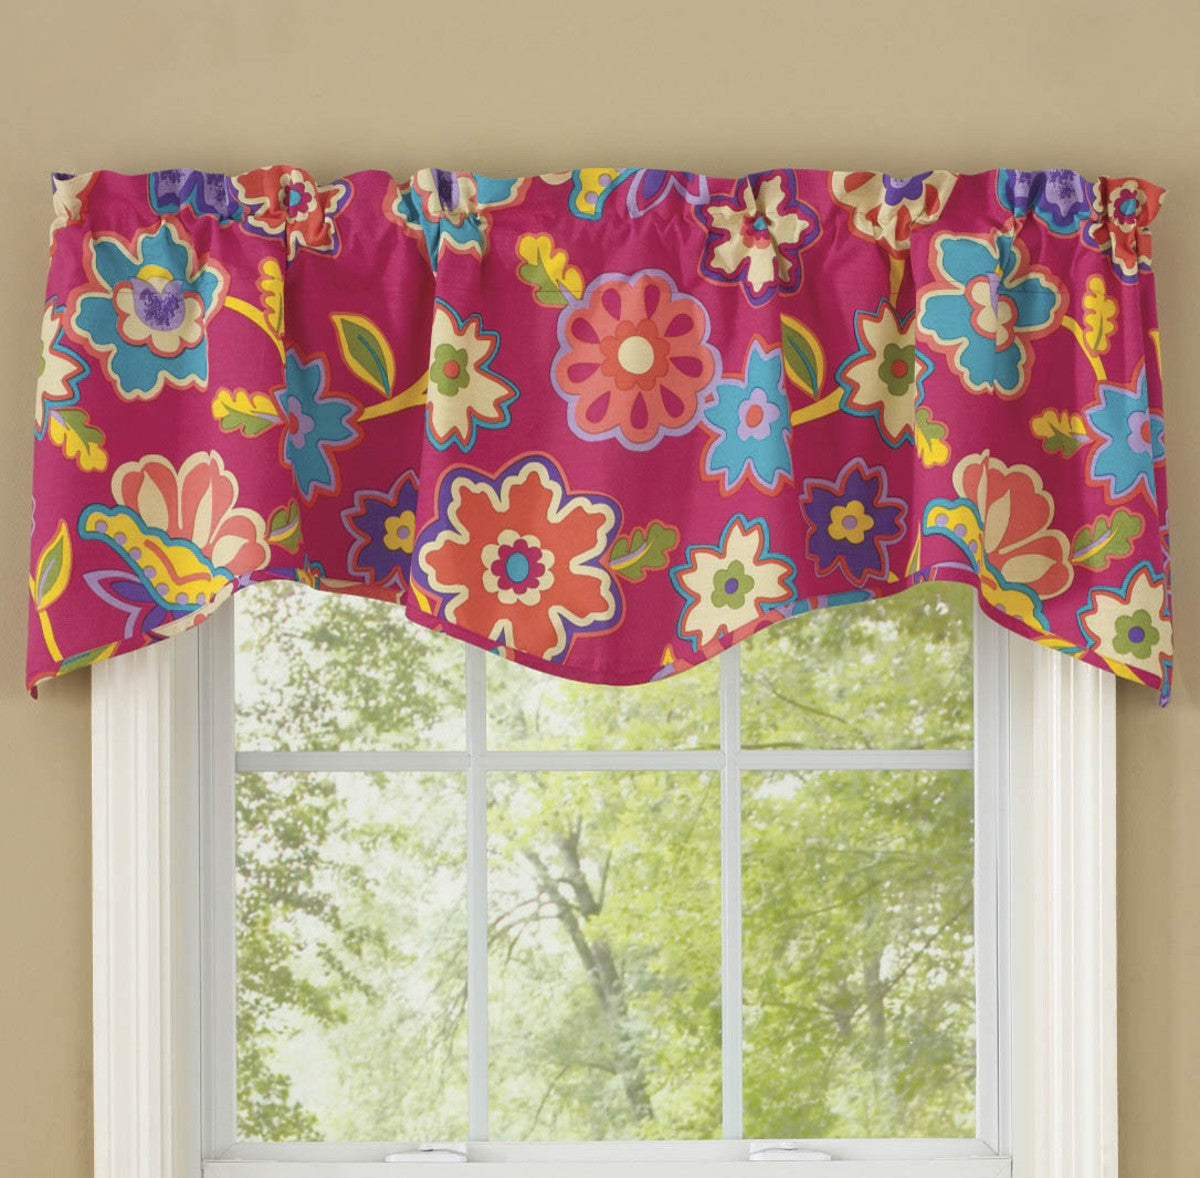 Patio Party Lined Wave Curtain Valance 58" x 18"